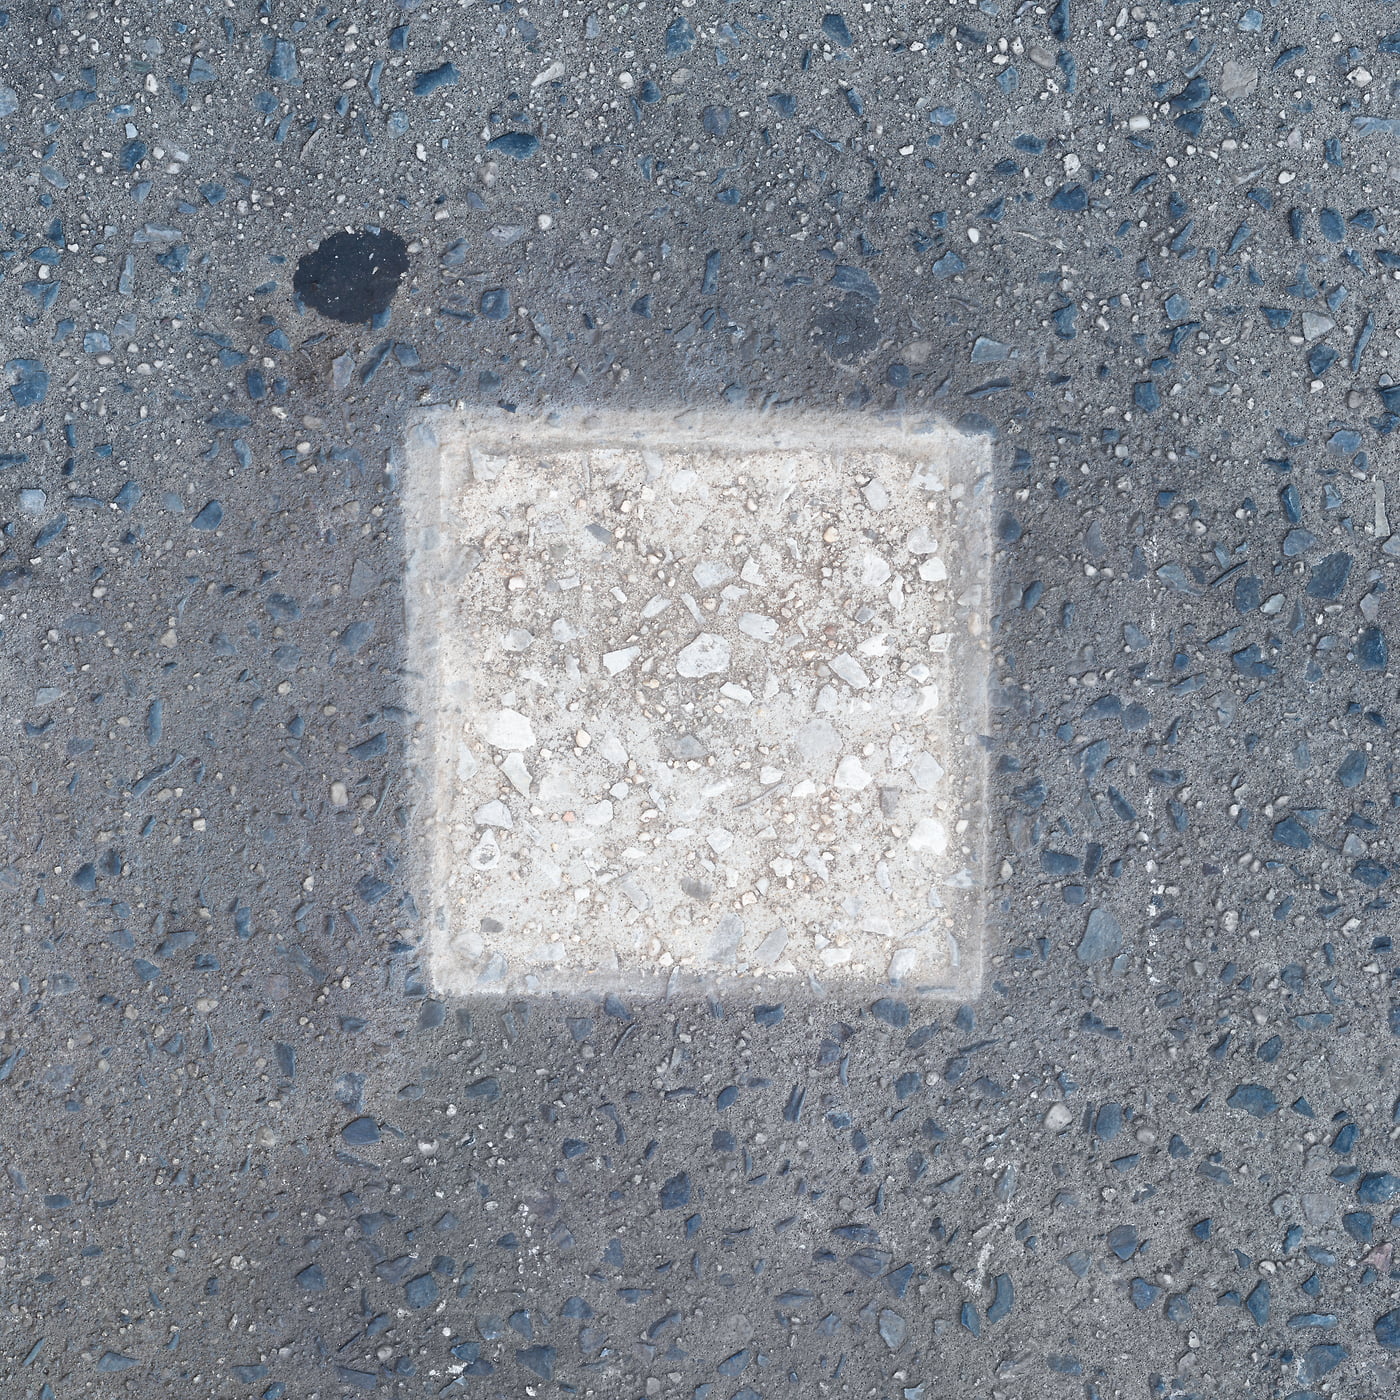 535 megapixels! A very high resolution, abstract square photo print of the sidewalk of New York City; fine art photograph created by Dan Piech in Manhattan, New York City.